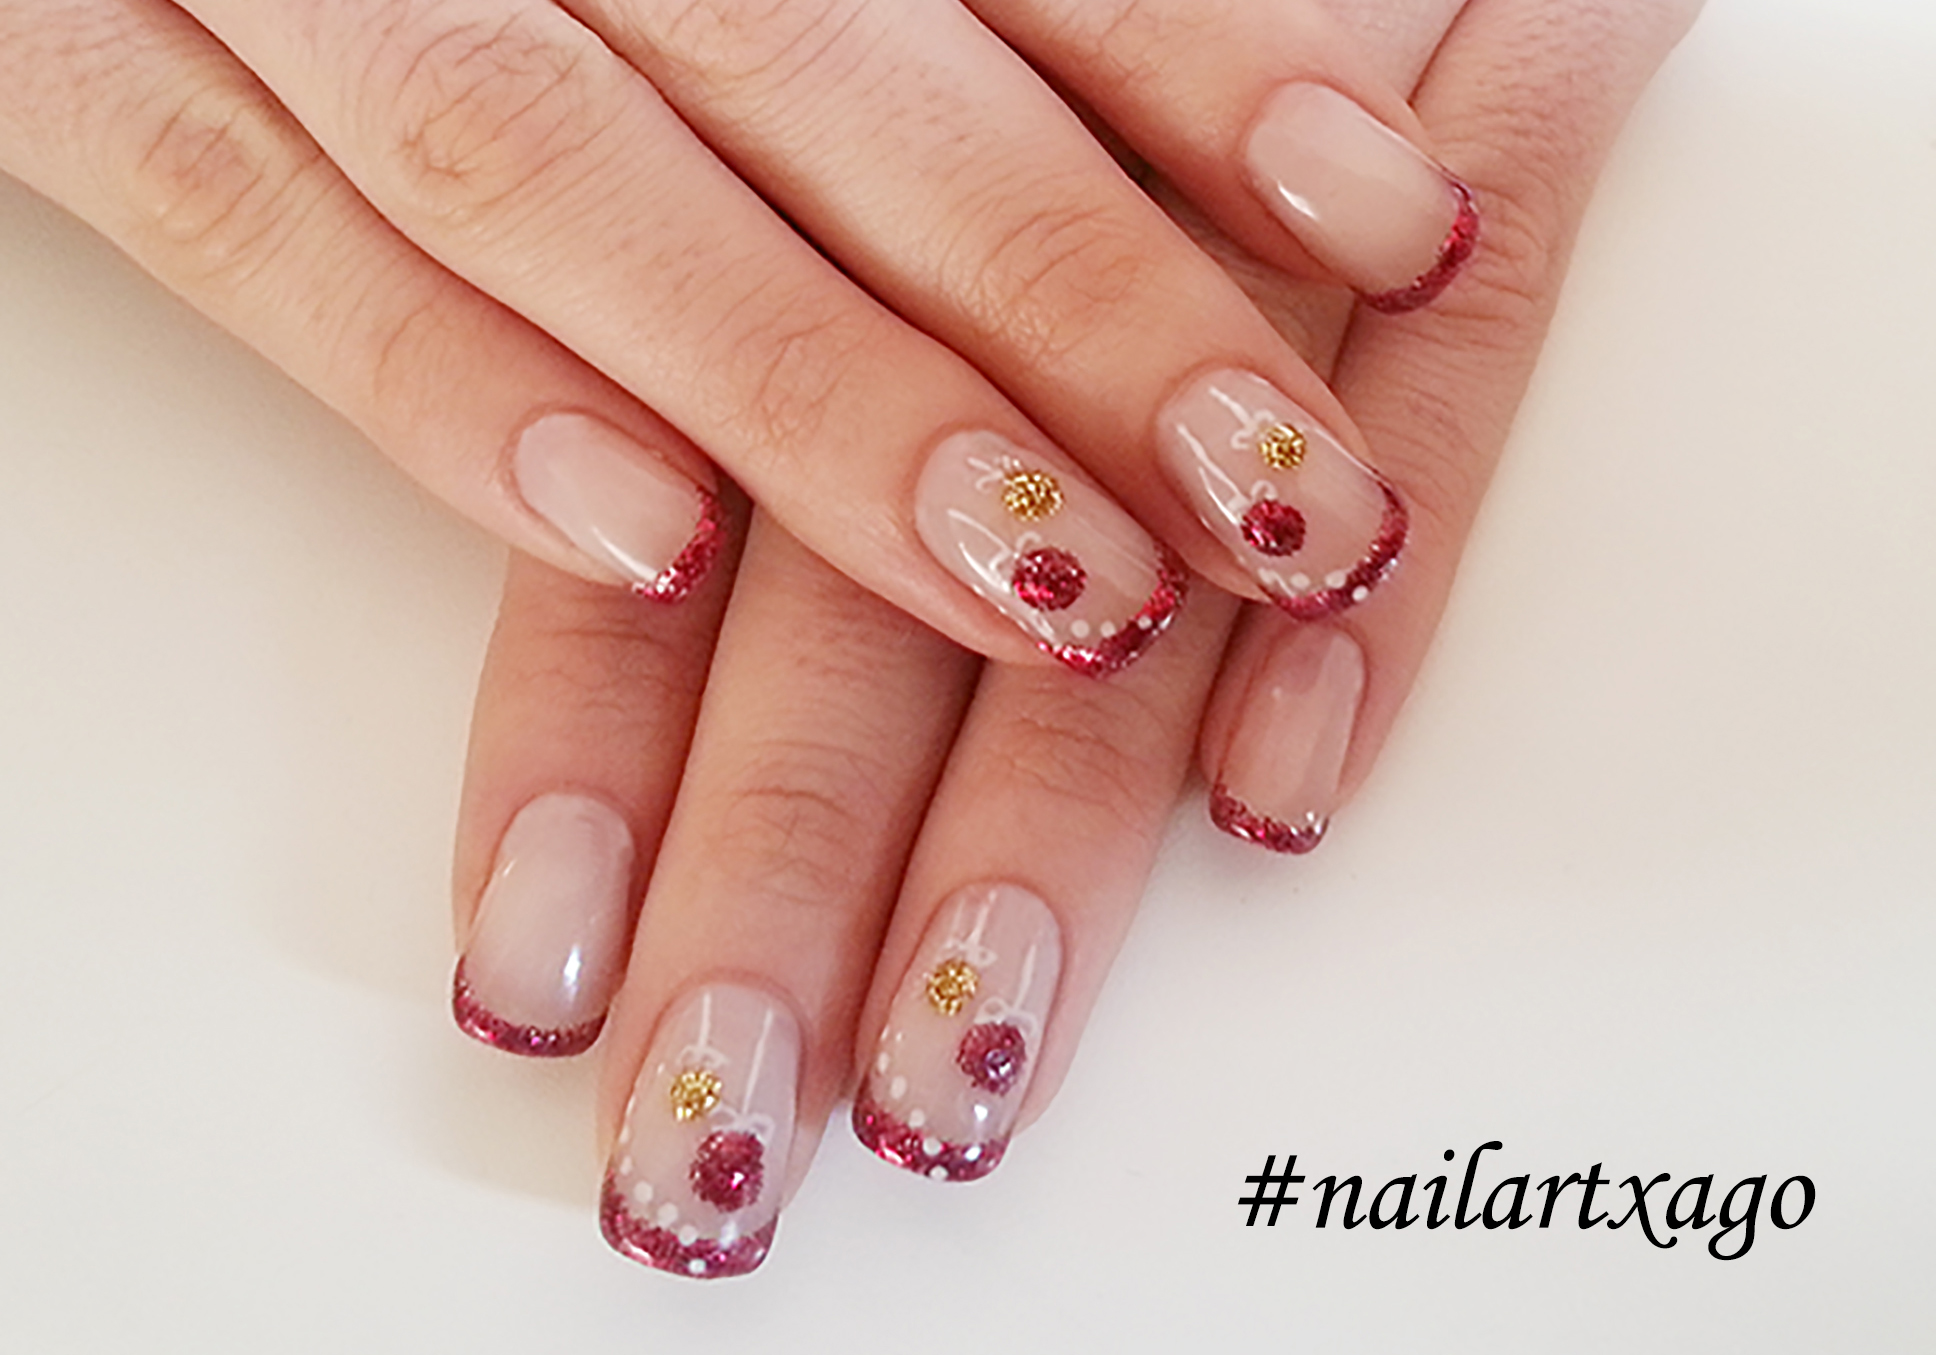 5. The Best Nail Art Instagram Accounts to Follow - wide 2